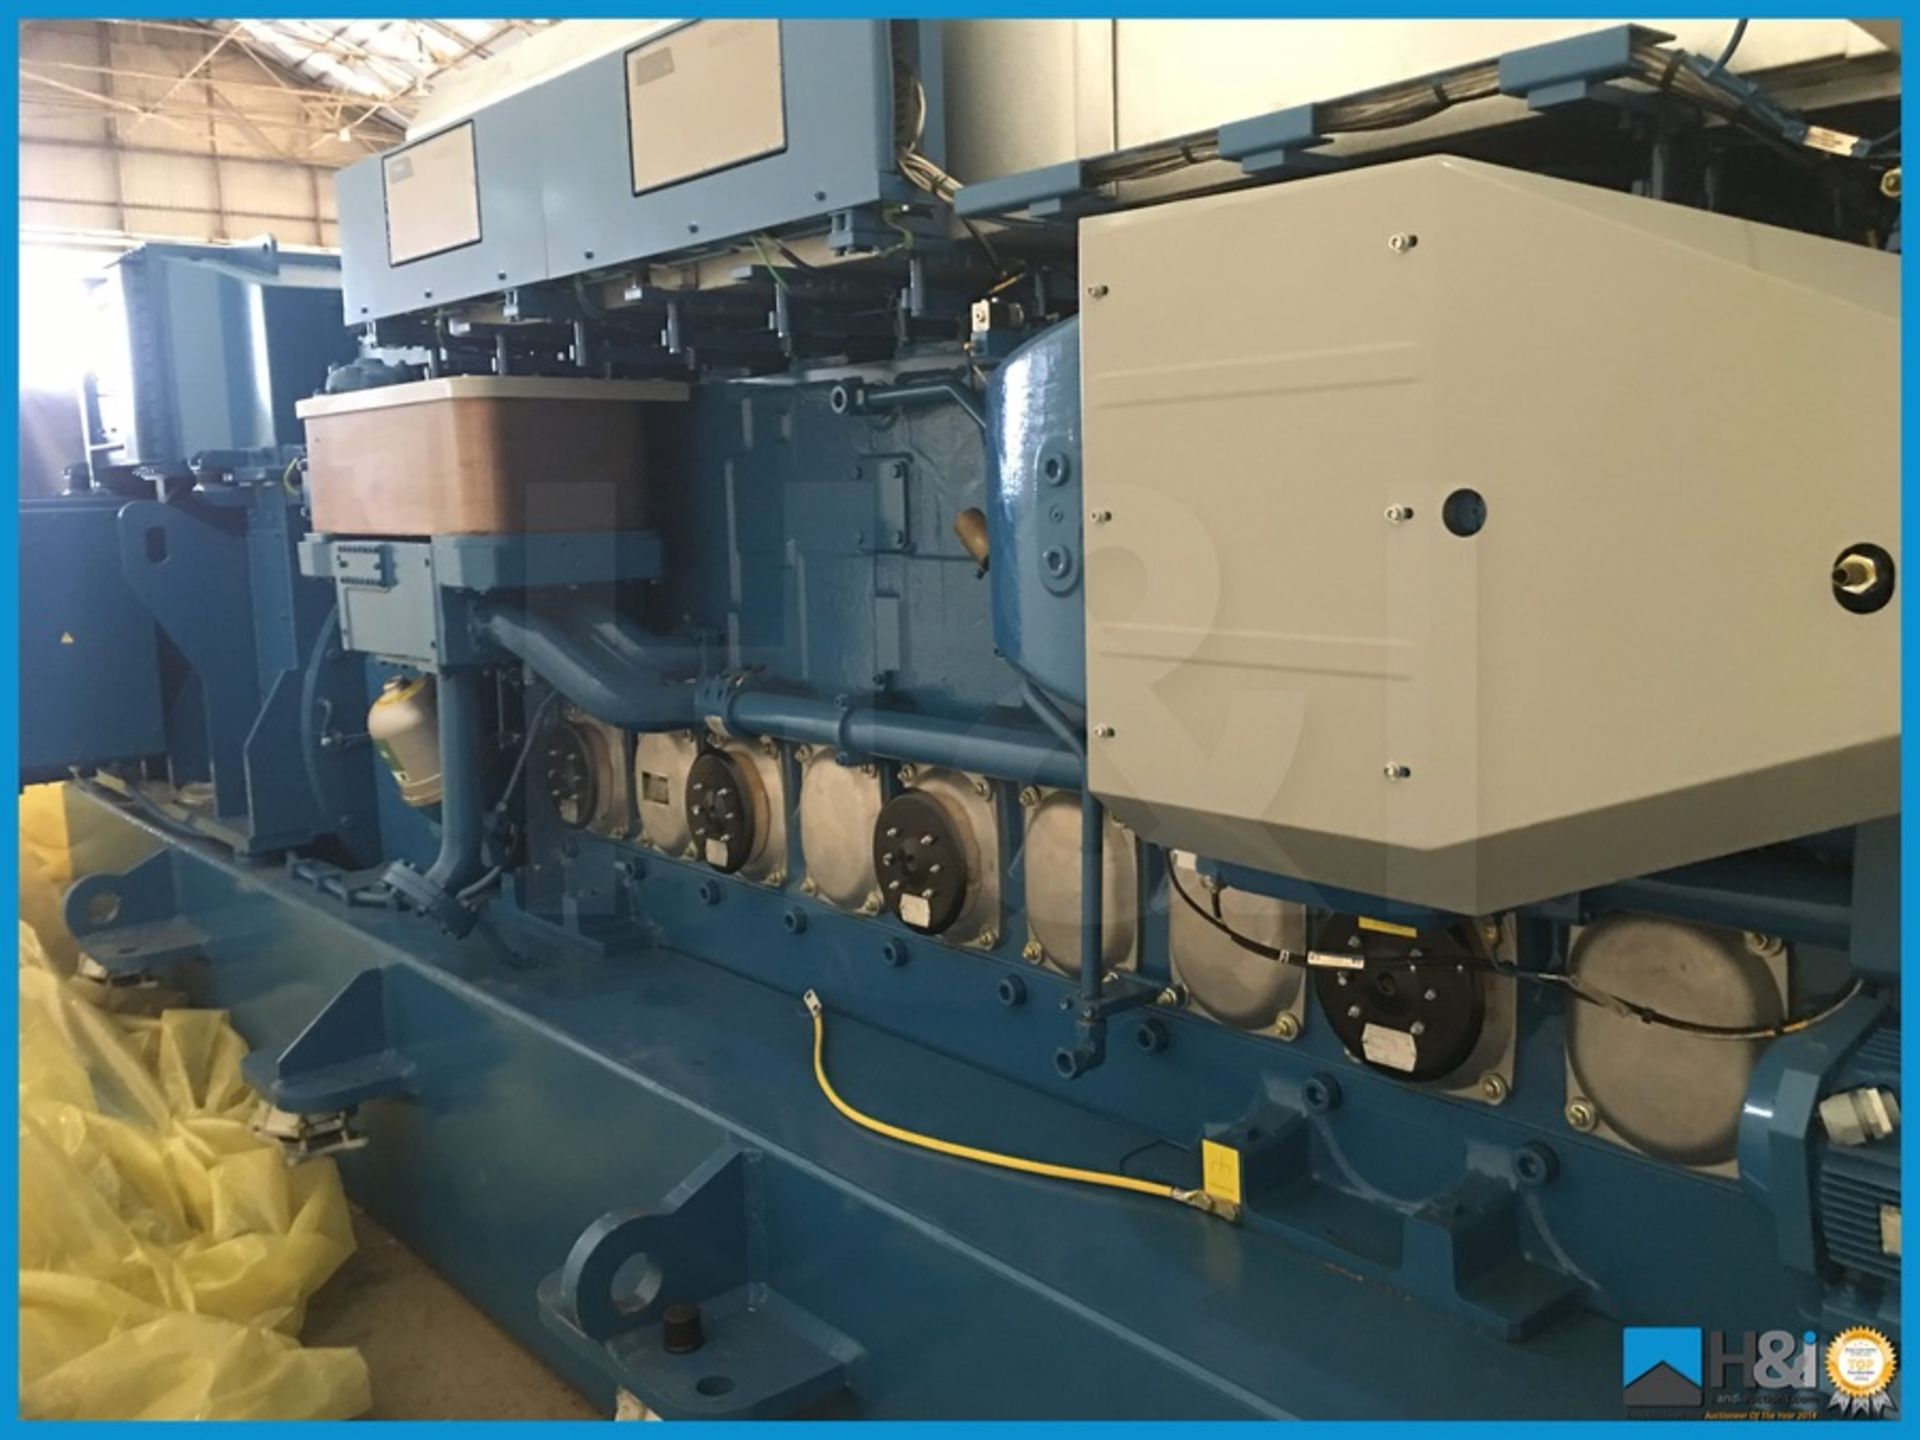 Unused Wartsila 9L20 high capacity diesel generator manufactured in 2013 for a large marine - Image 17 of 17